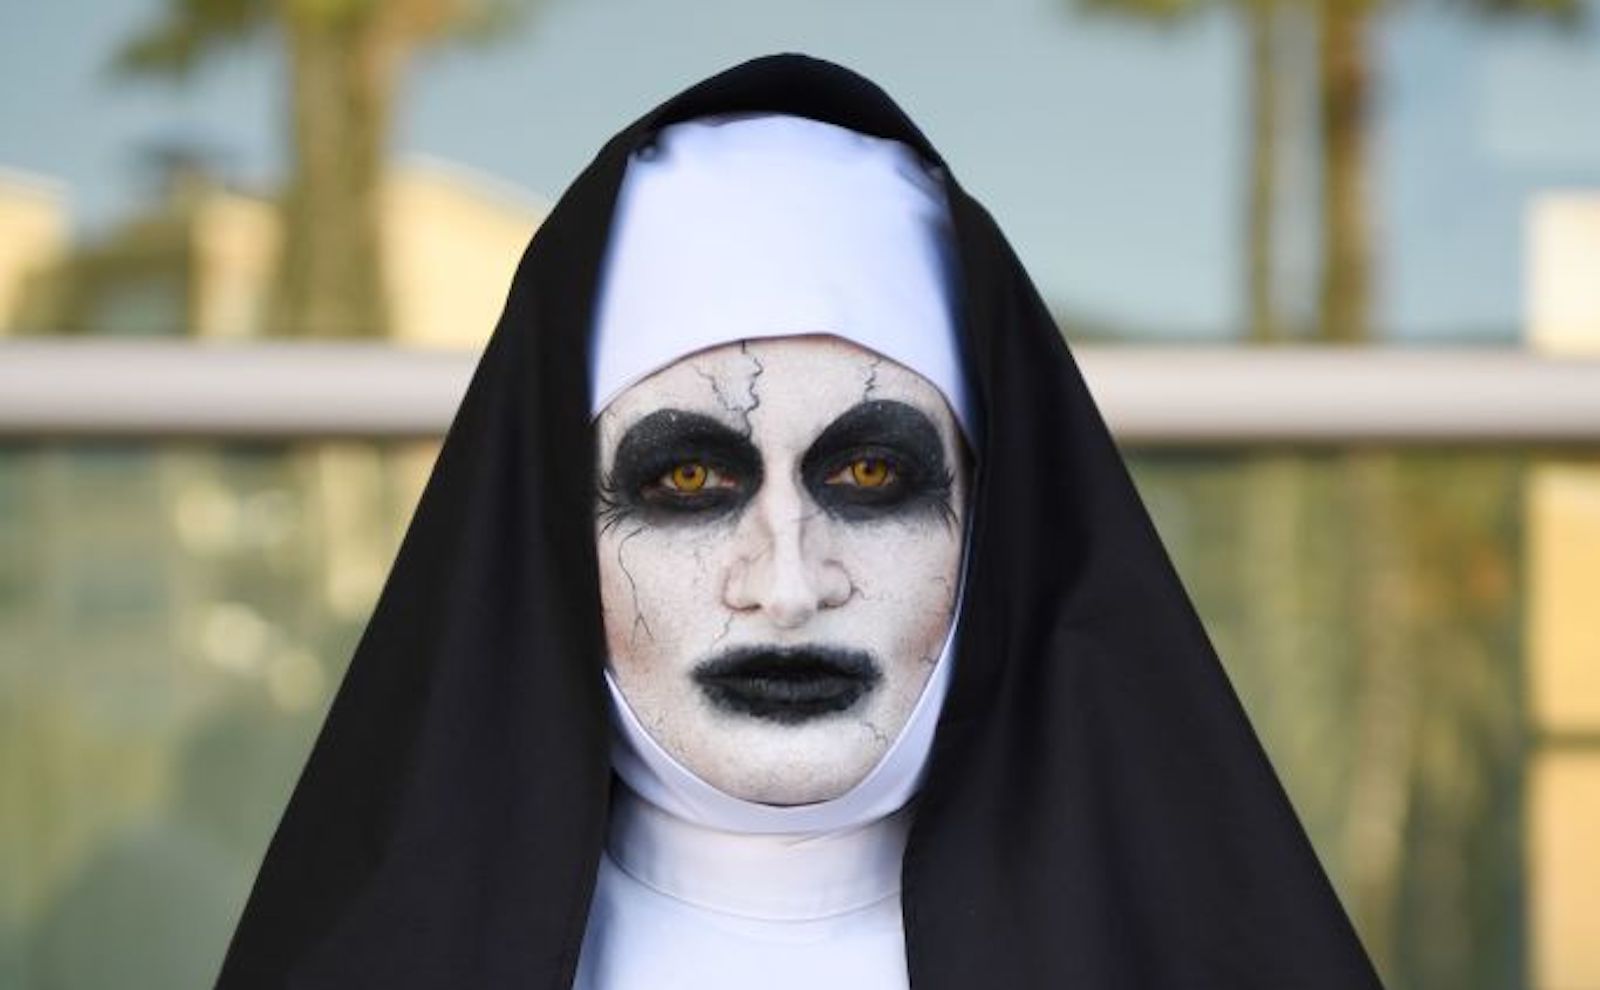 Cosplayer Devan Blake dressed as Valak from "The Conjuring" attends the 2019 Comic-Con International on July 18, 2019 in San Diego, California.